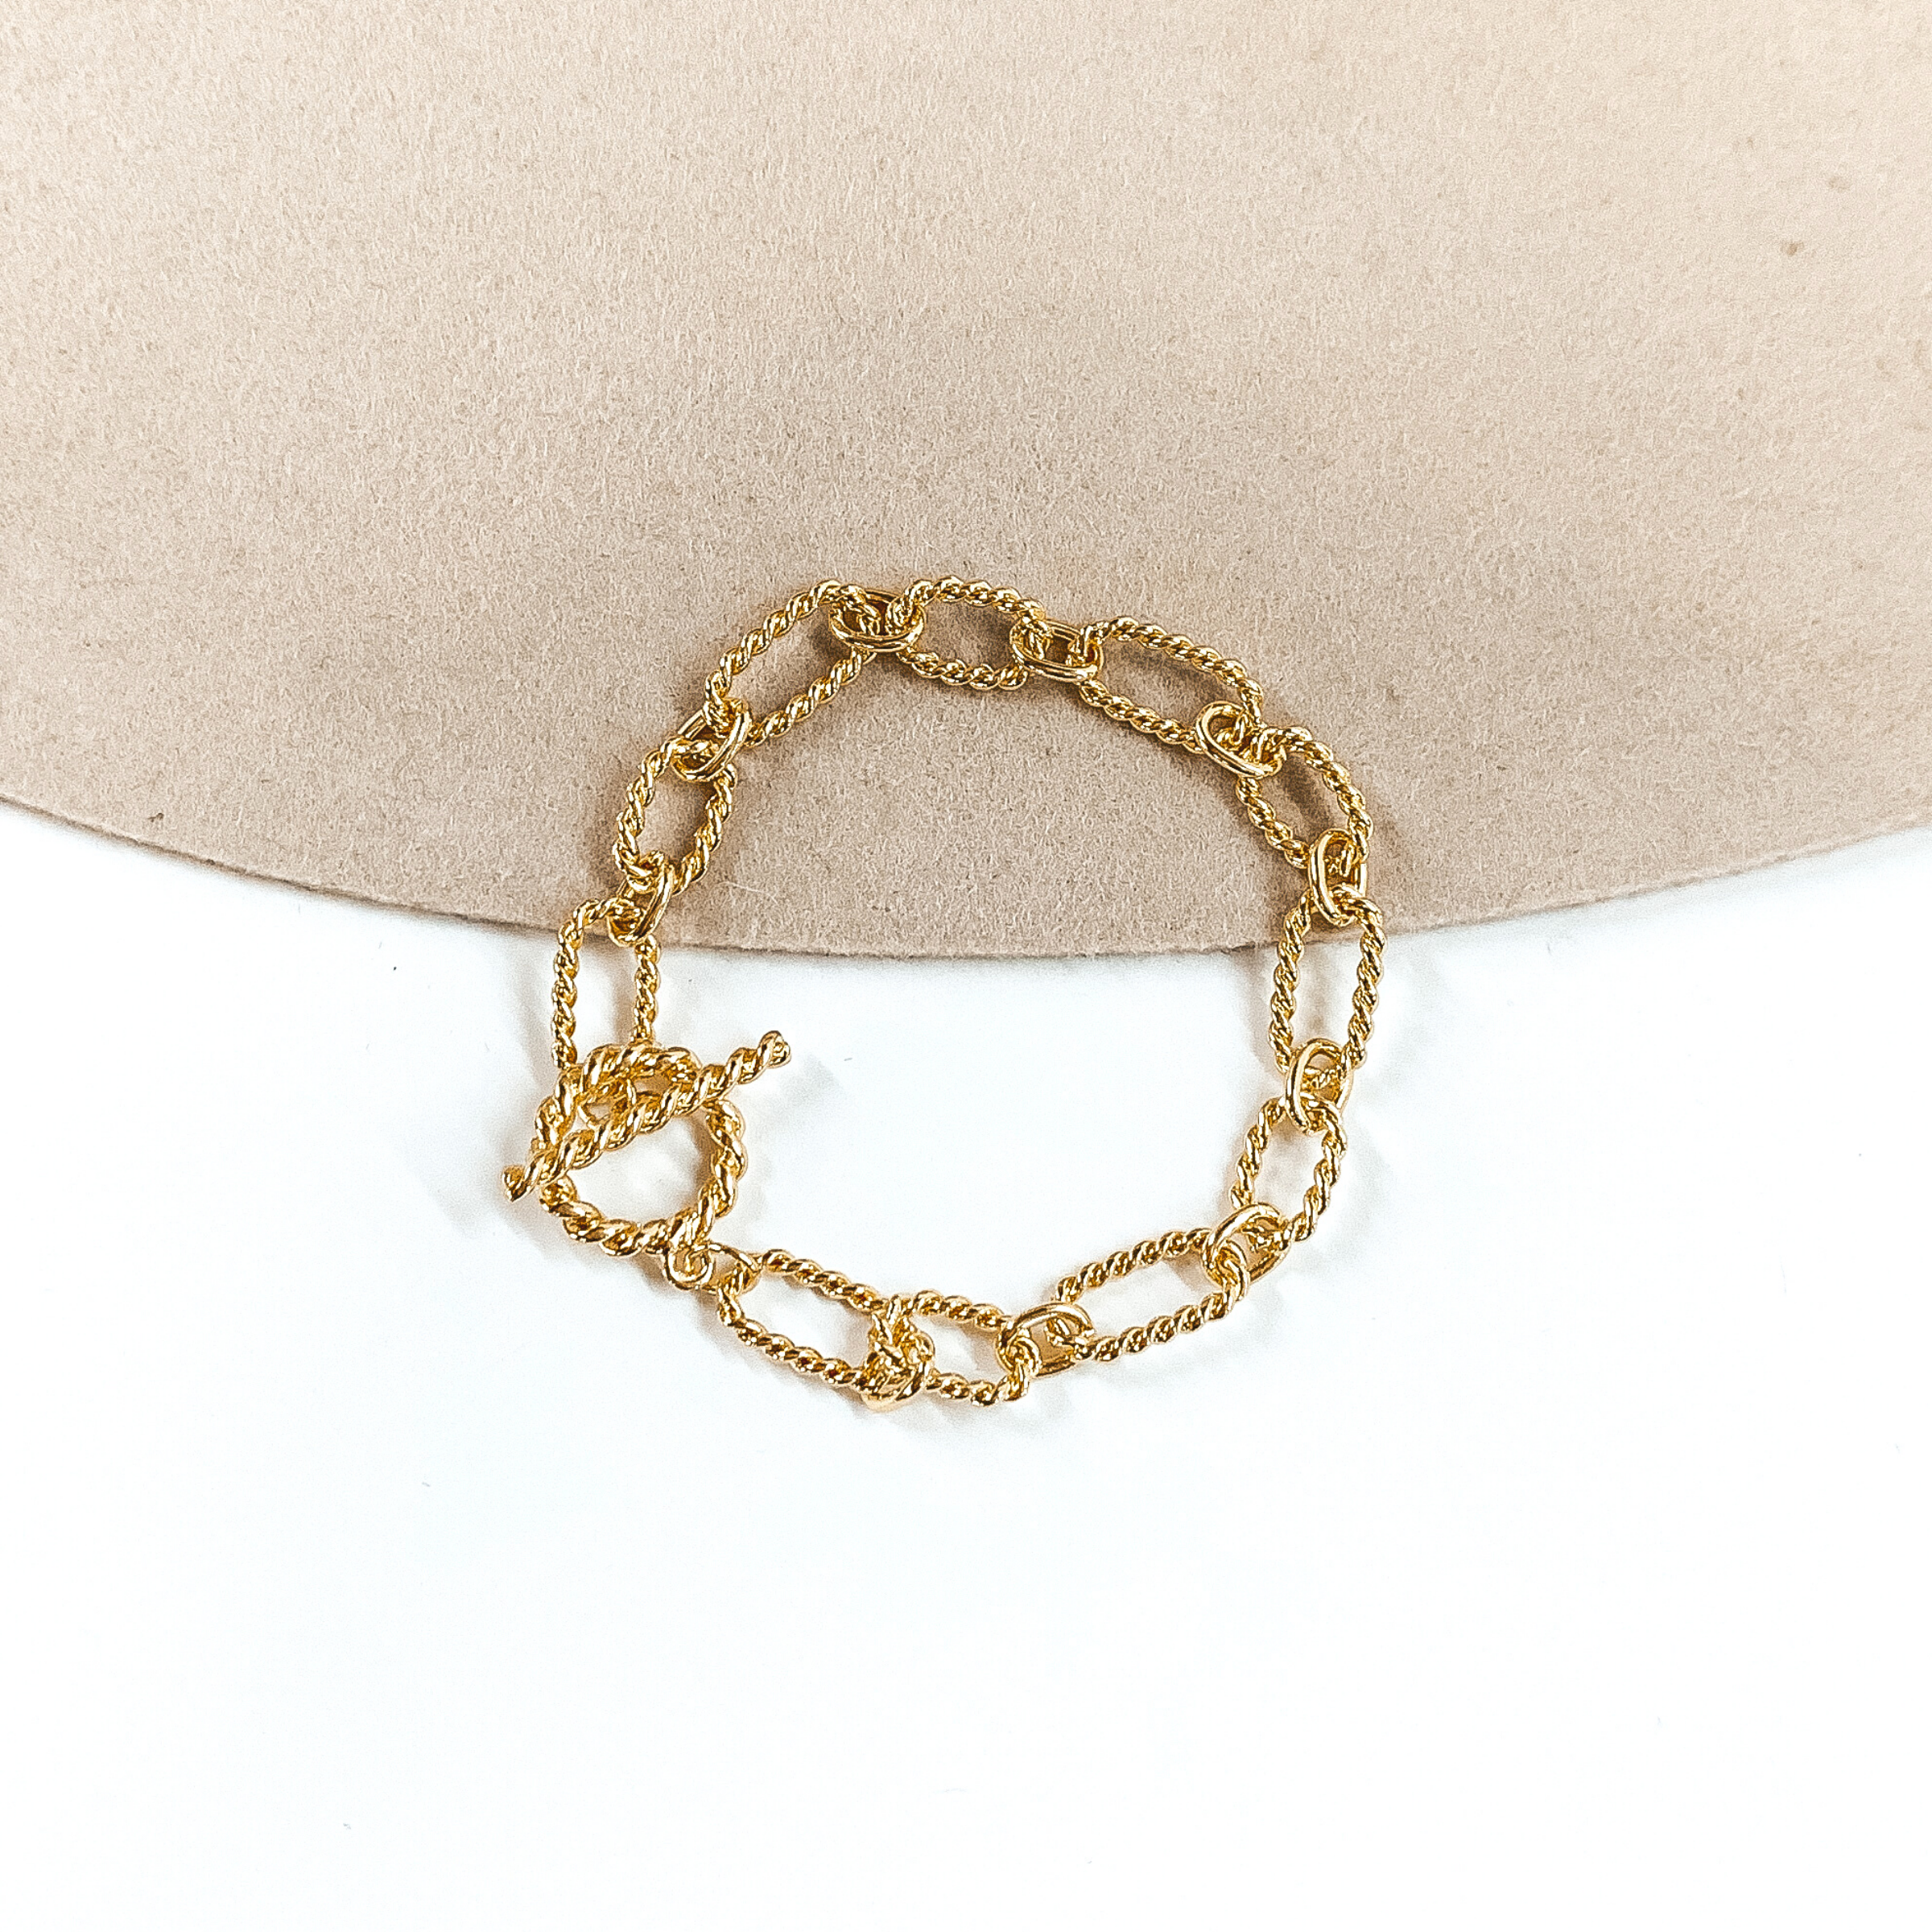 Gold, twisted paperclip chained bracelet in gold. This bracelet has a toggle clasp. This bracelet is pictured on a white and beige background. 